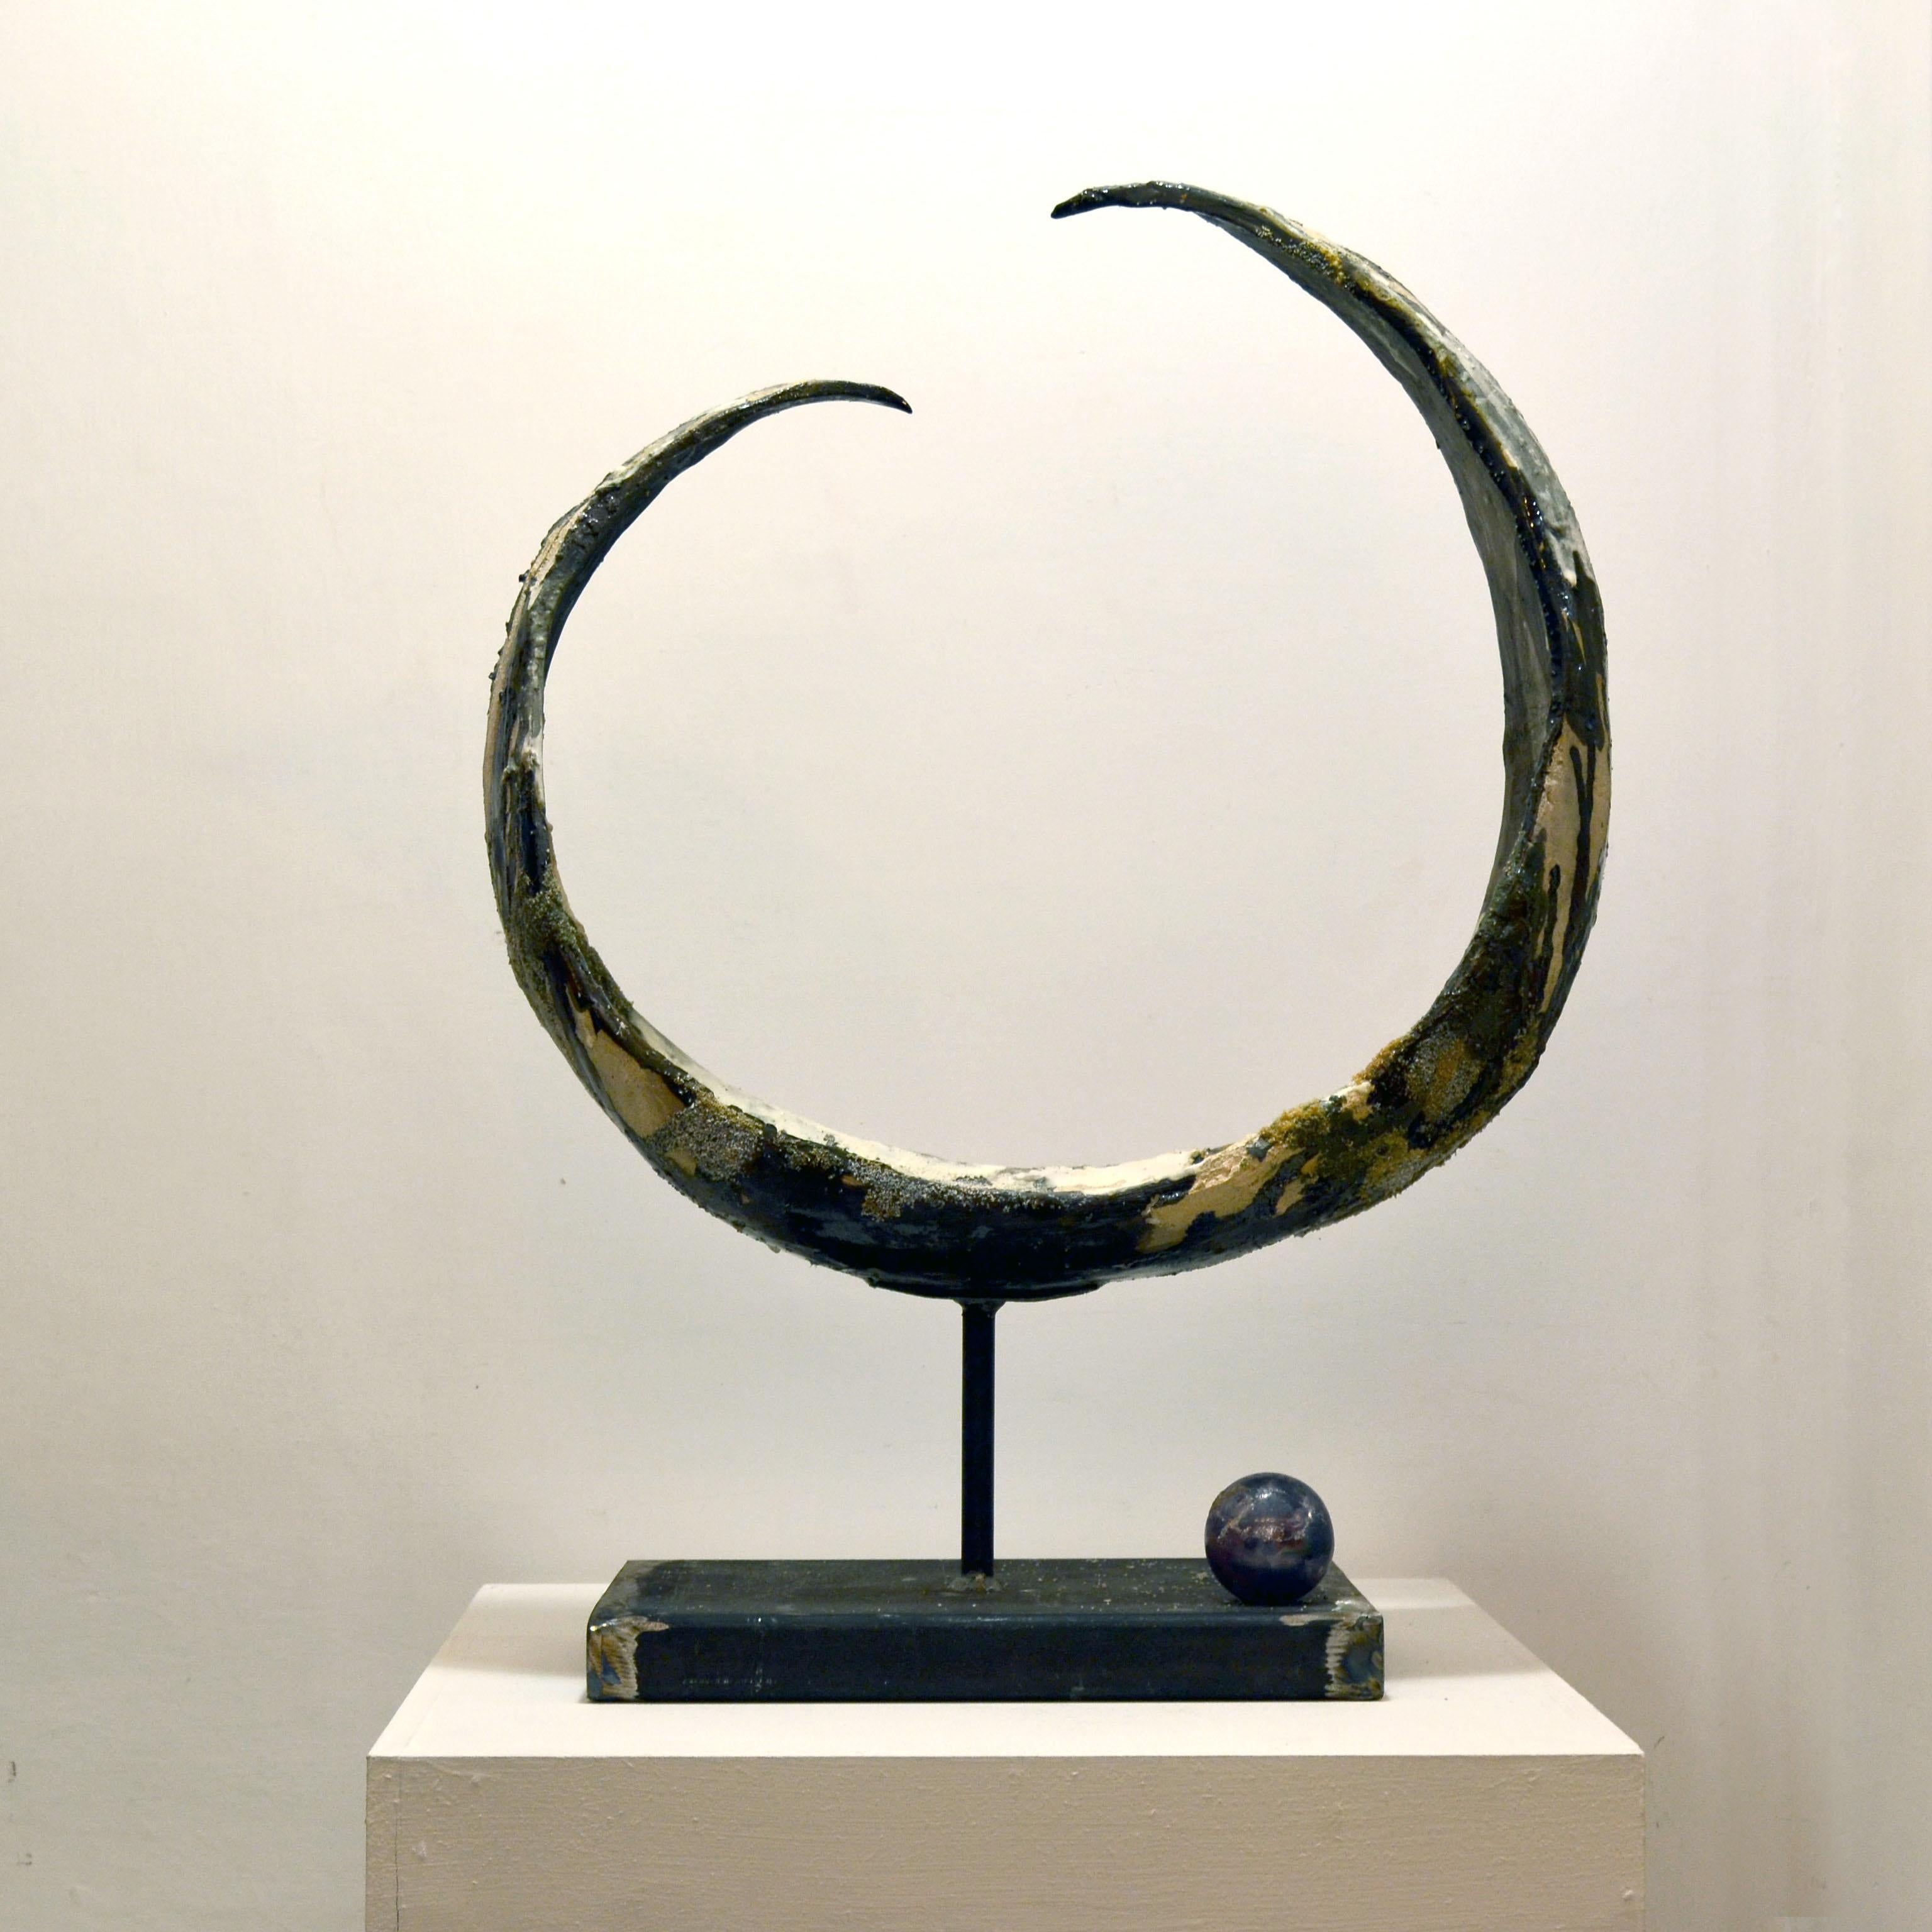 Hand-formed clay sculpture, worked with engobbio and acid in 1st firing and aventurine glaze in 2nd firing, with silica applications.
Iron base. 3rd fire sphere decoration with blue luster.
> First Prize Winner at the 8th Mino da Fiesole Prize